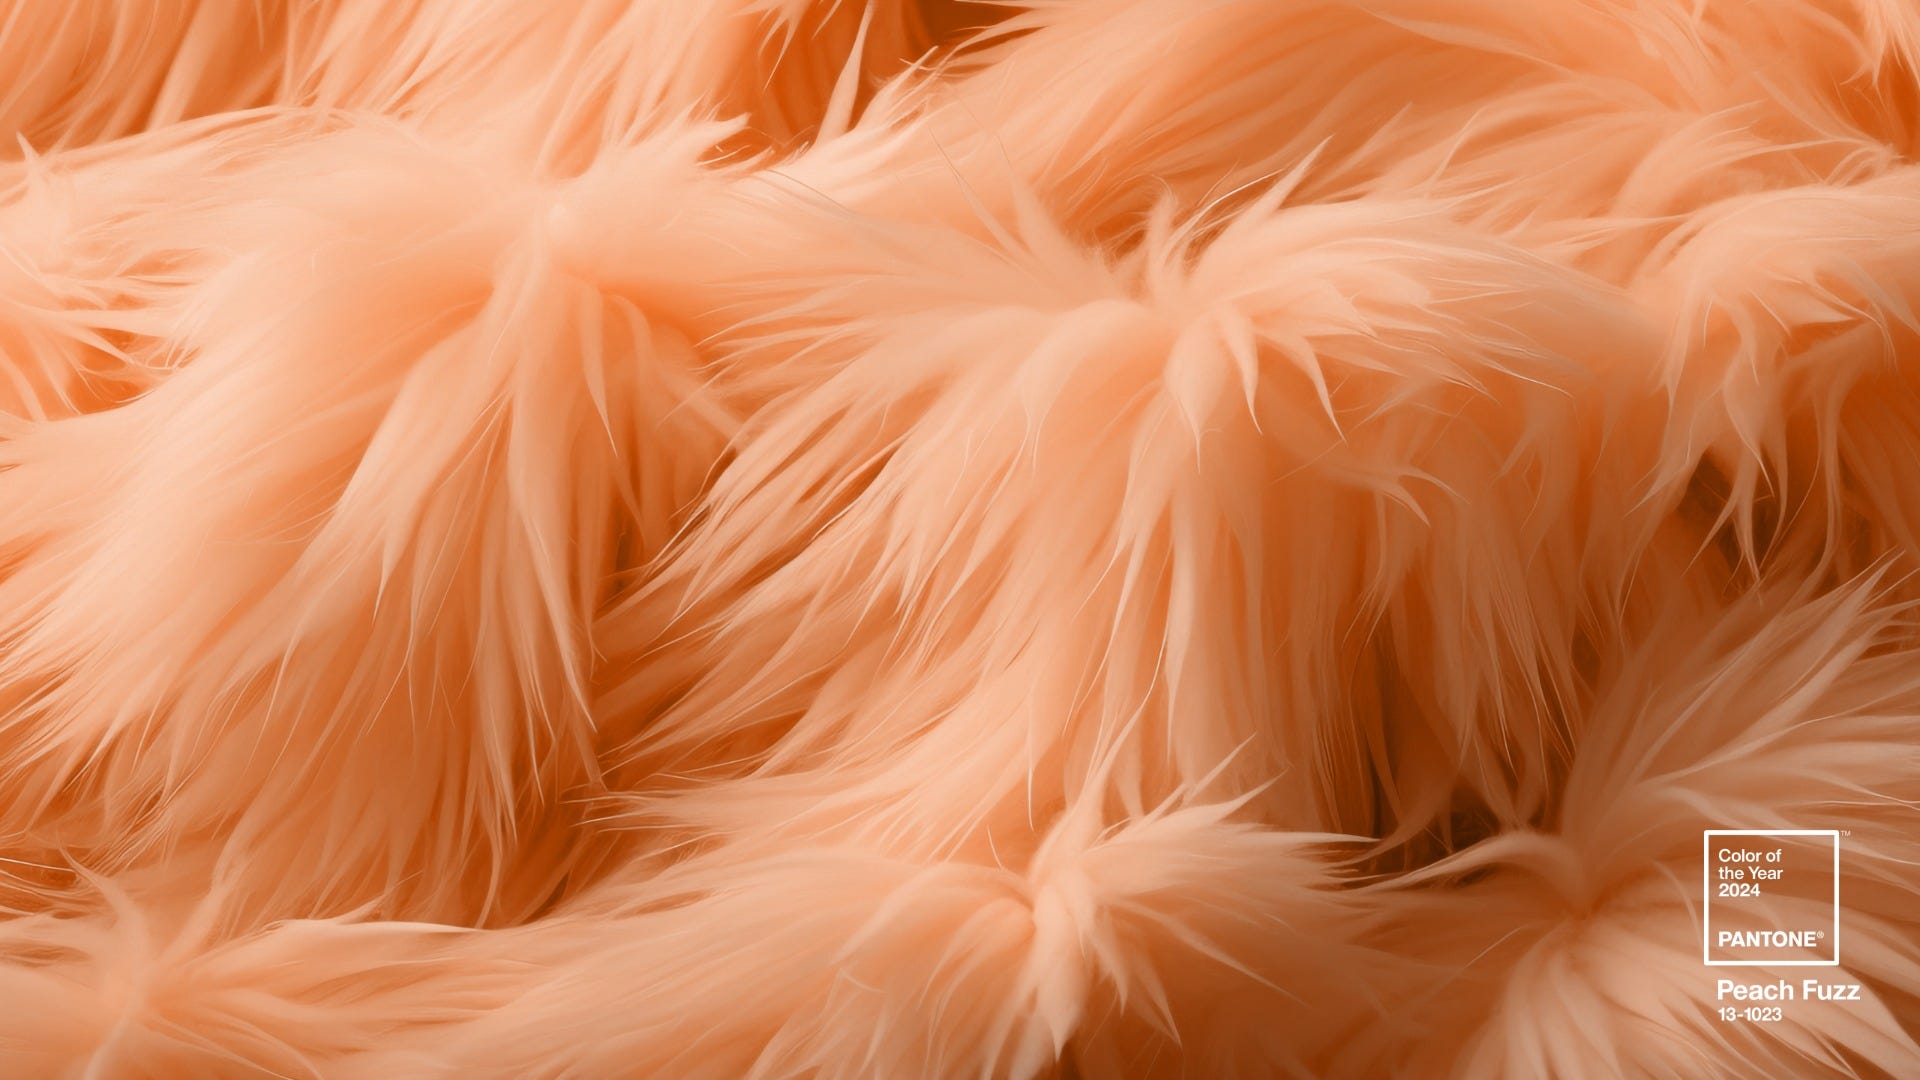 peach fuzz Pantone color of the year 2024